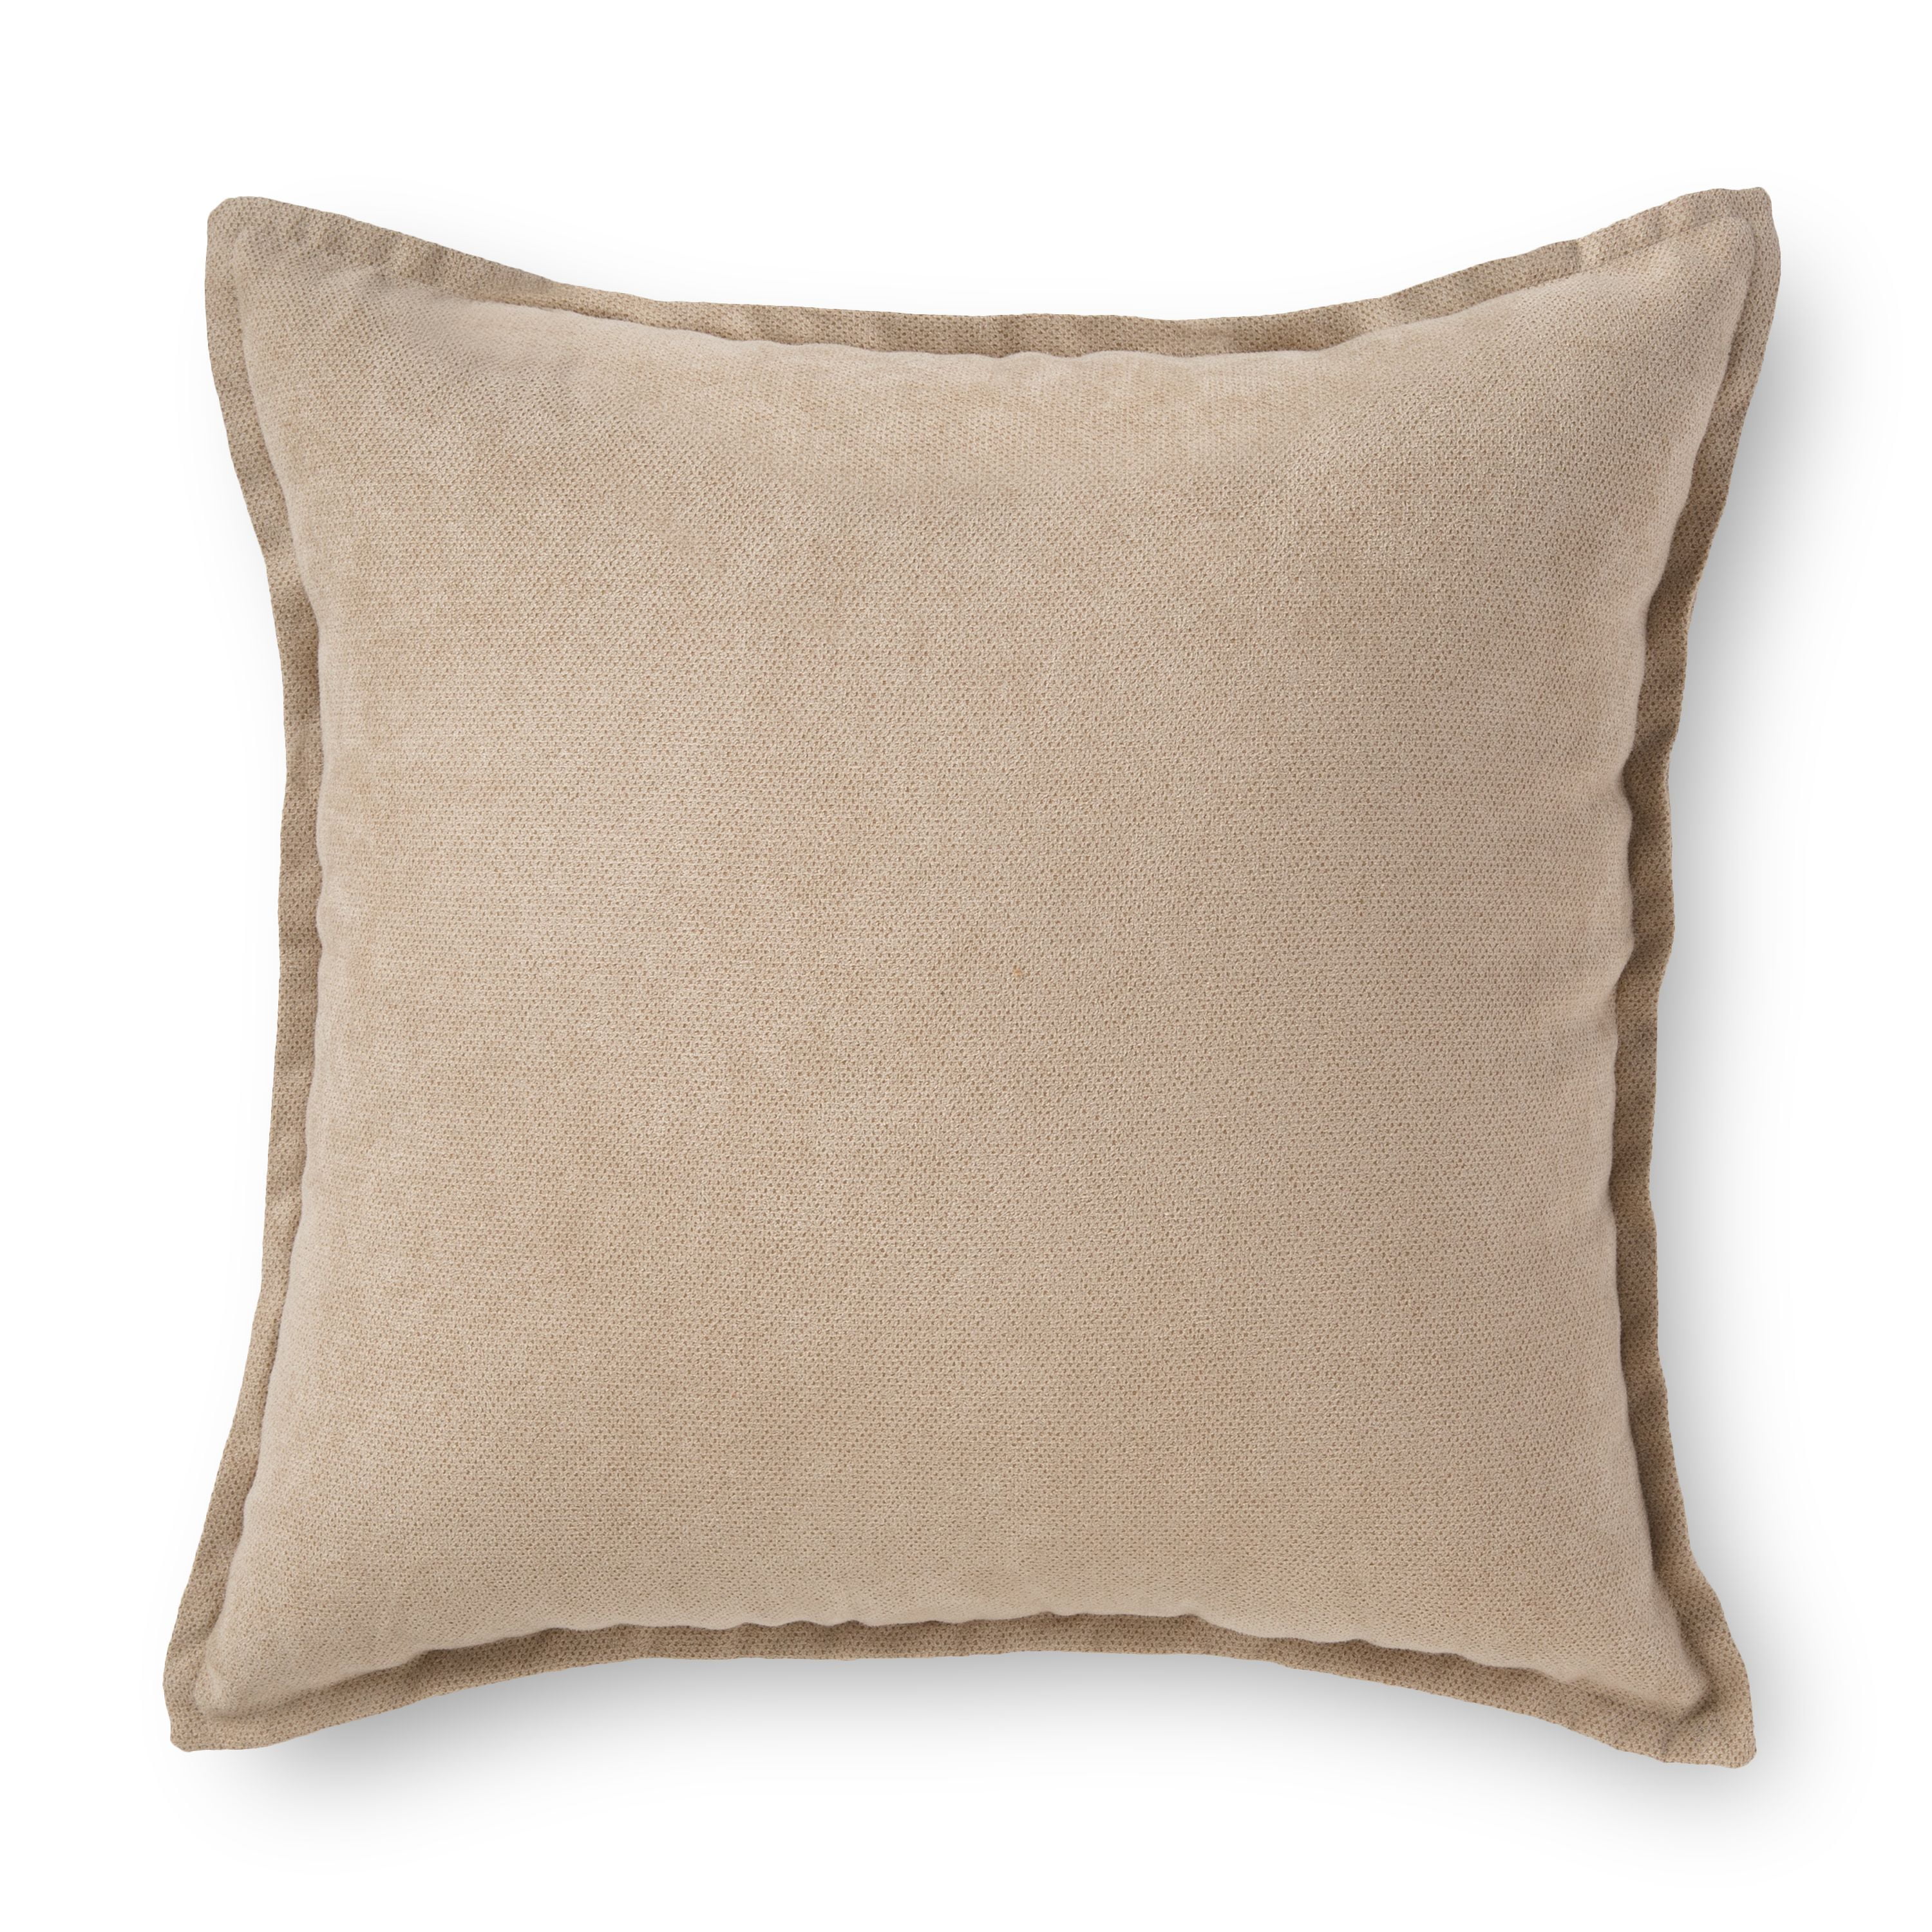 New Modern Soft Faux Suede Plain Fabric Handmade Cushion Cover & Filling 